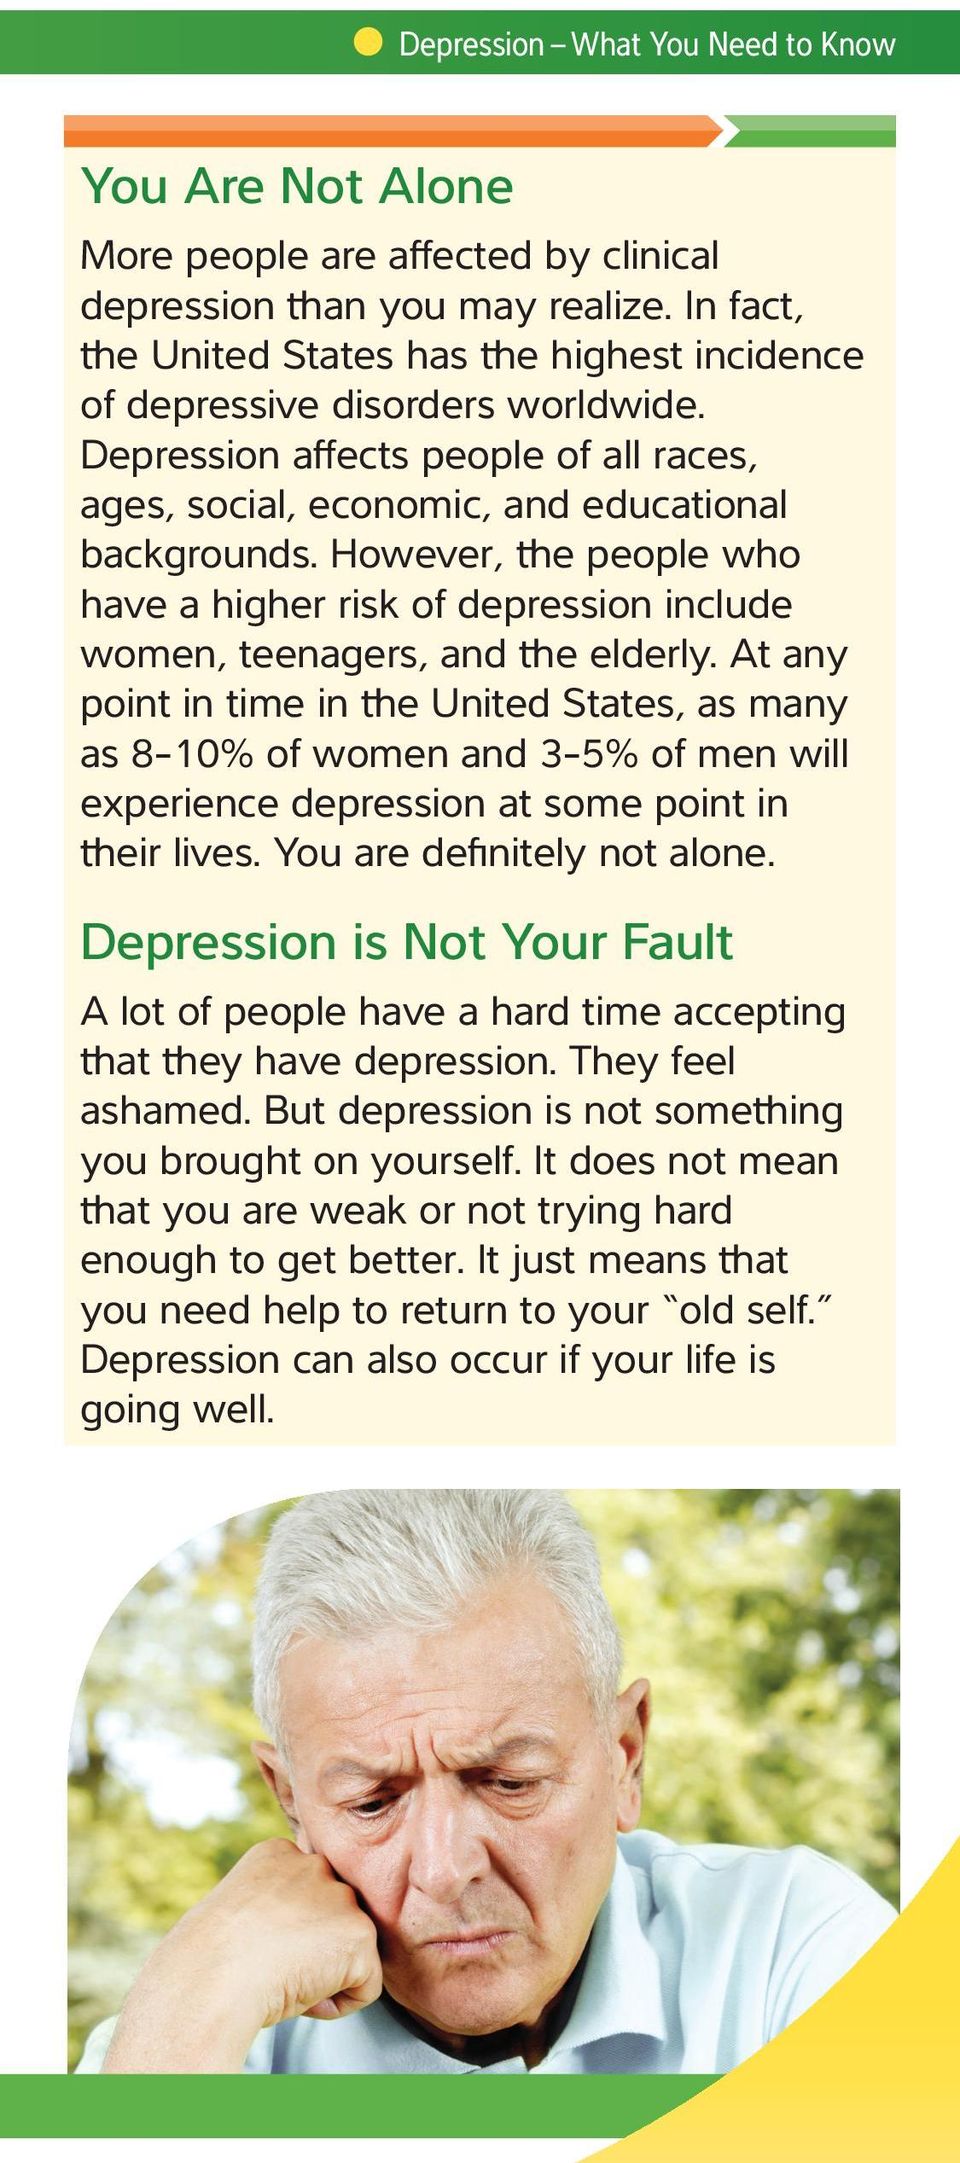 However, the people who have a higher risk of depression include women, teenagers, and the elderly.